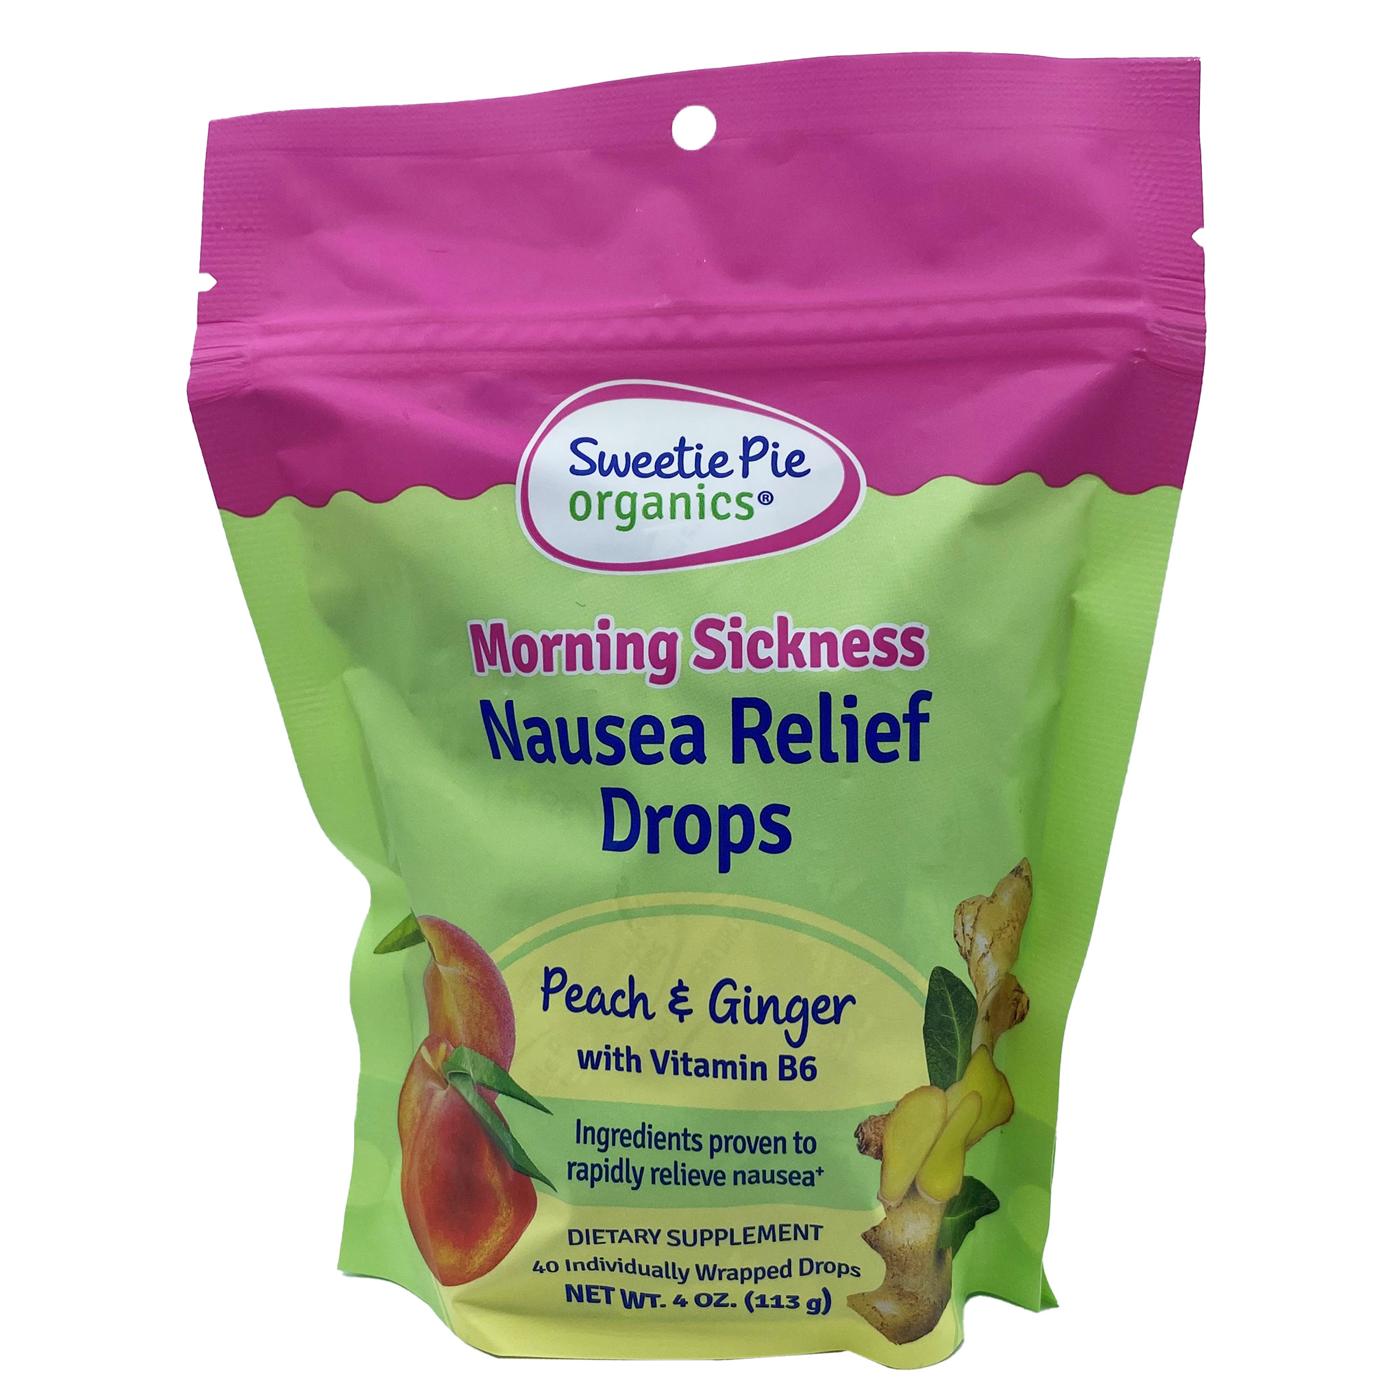 Sweetie Pie Organics Morning Sickness Nausea Relief Drops - Peach & Ginger; image 1 of 2